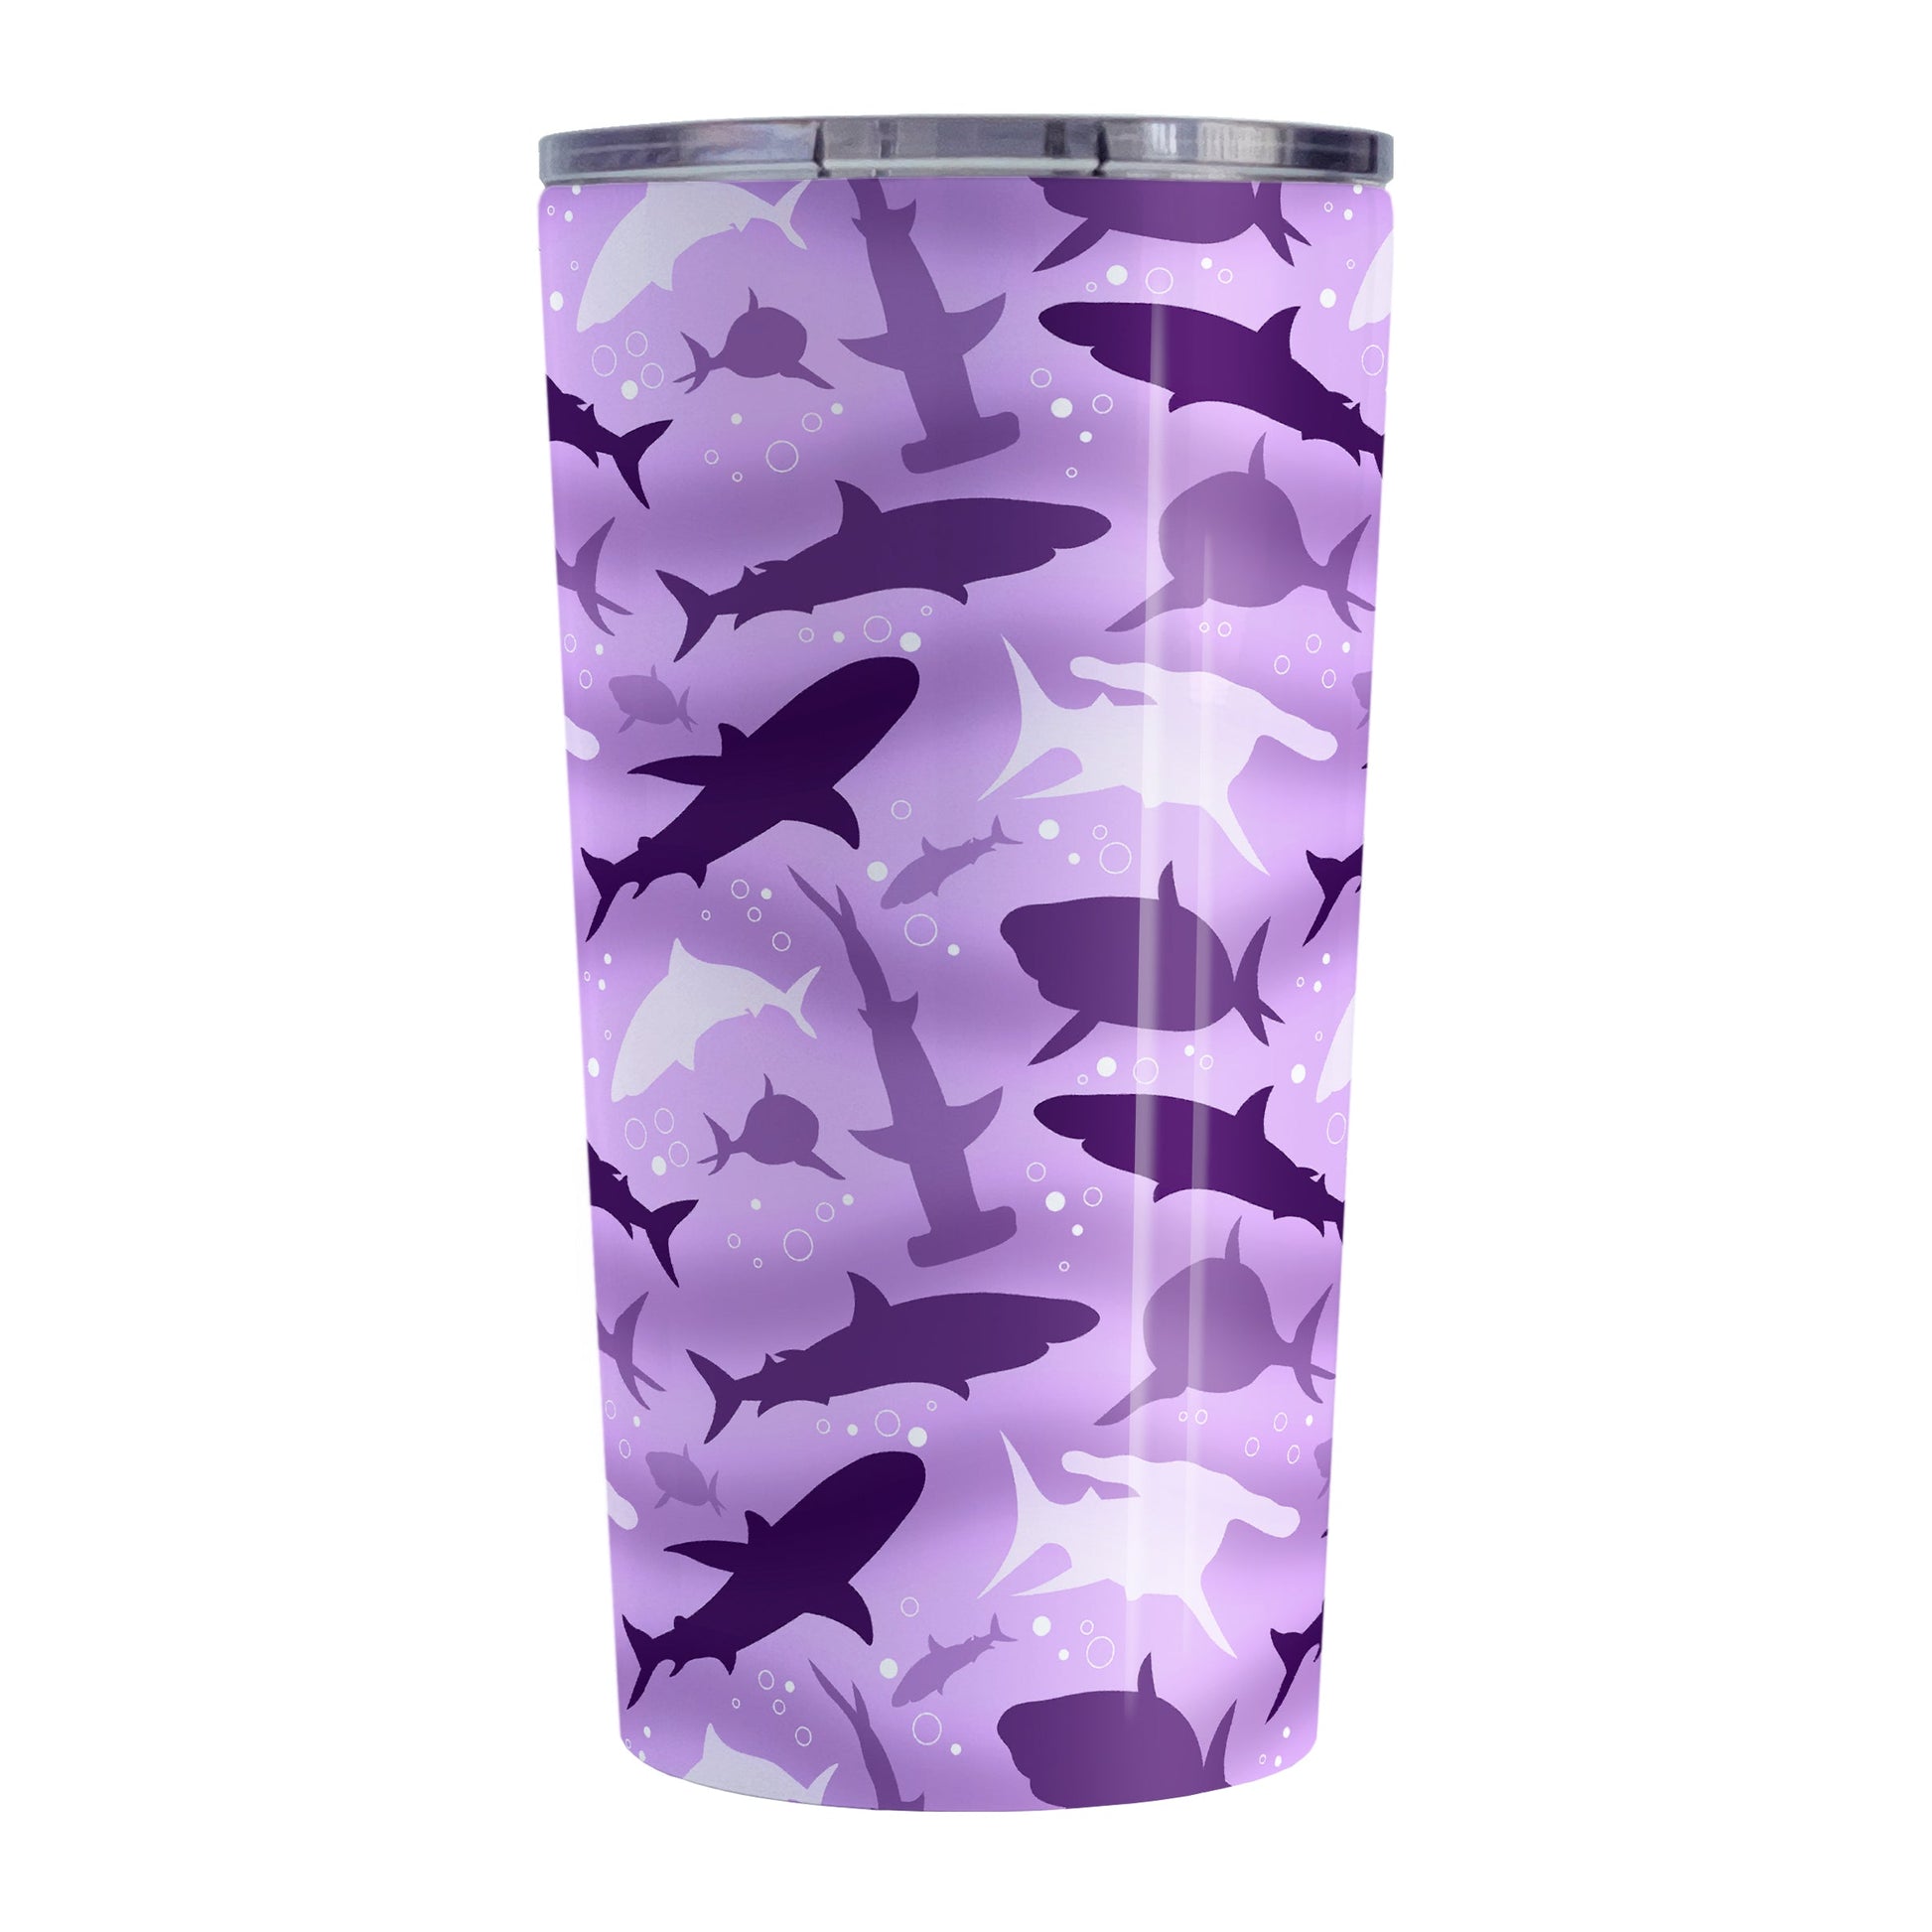 Purple Frenzy Sharks Tumbler Cup (20oz) at Amy's Coffee Mugs. A stainless steel insulated tumbler cup designed with a pattern of sharks in different shades of purple, in a frenzy deep beneath the water, that wraps around the cup. Perfect for people who love sharks or are looking for the perfect shark gift.